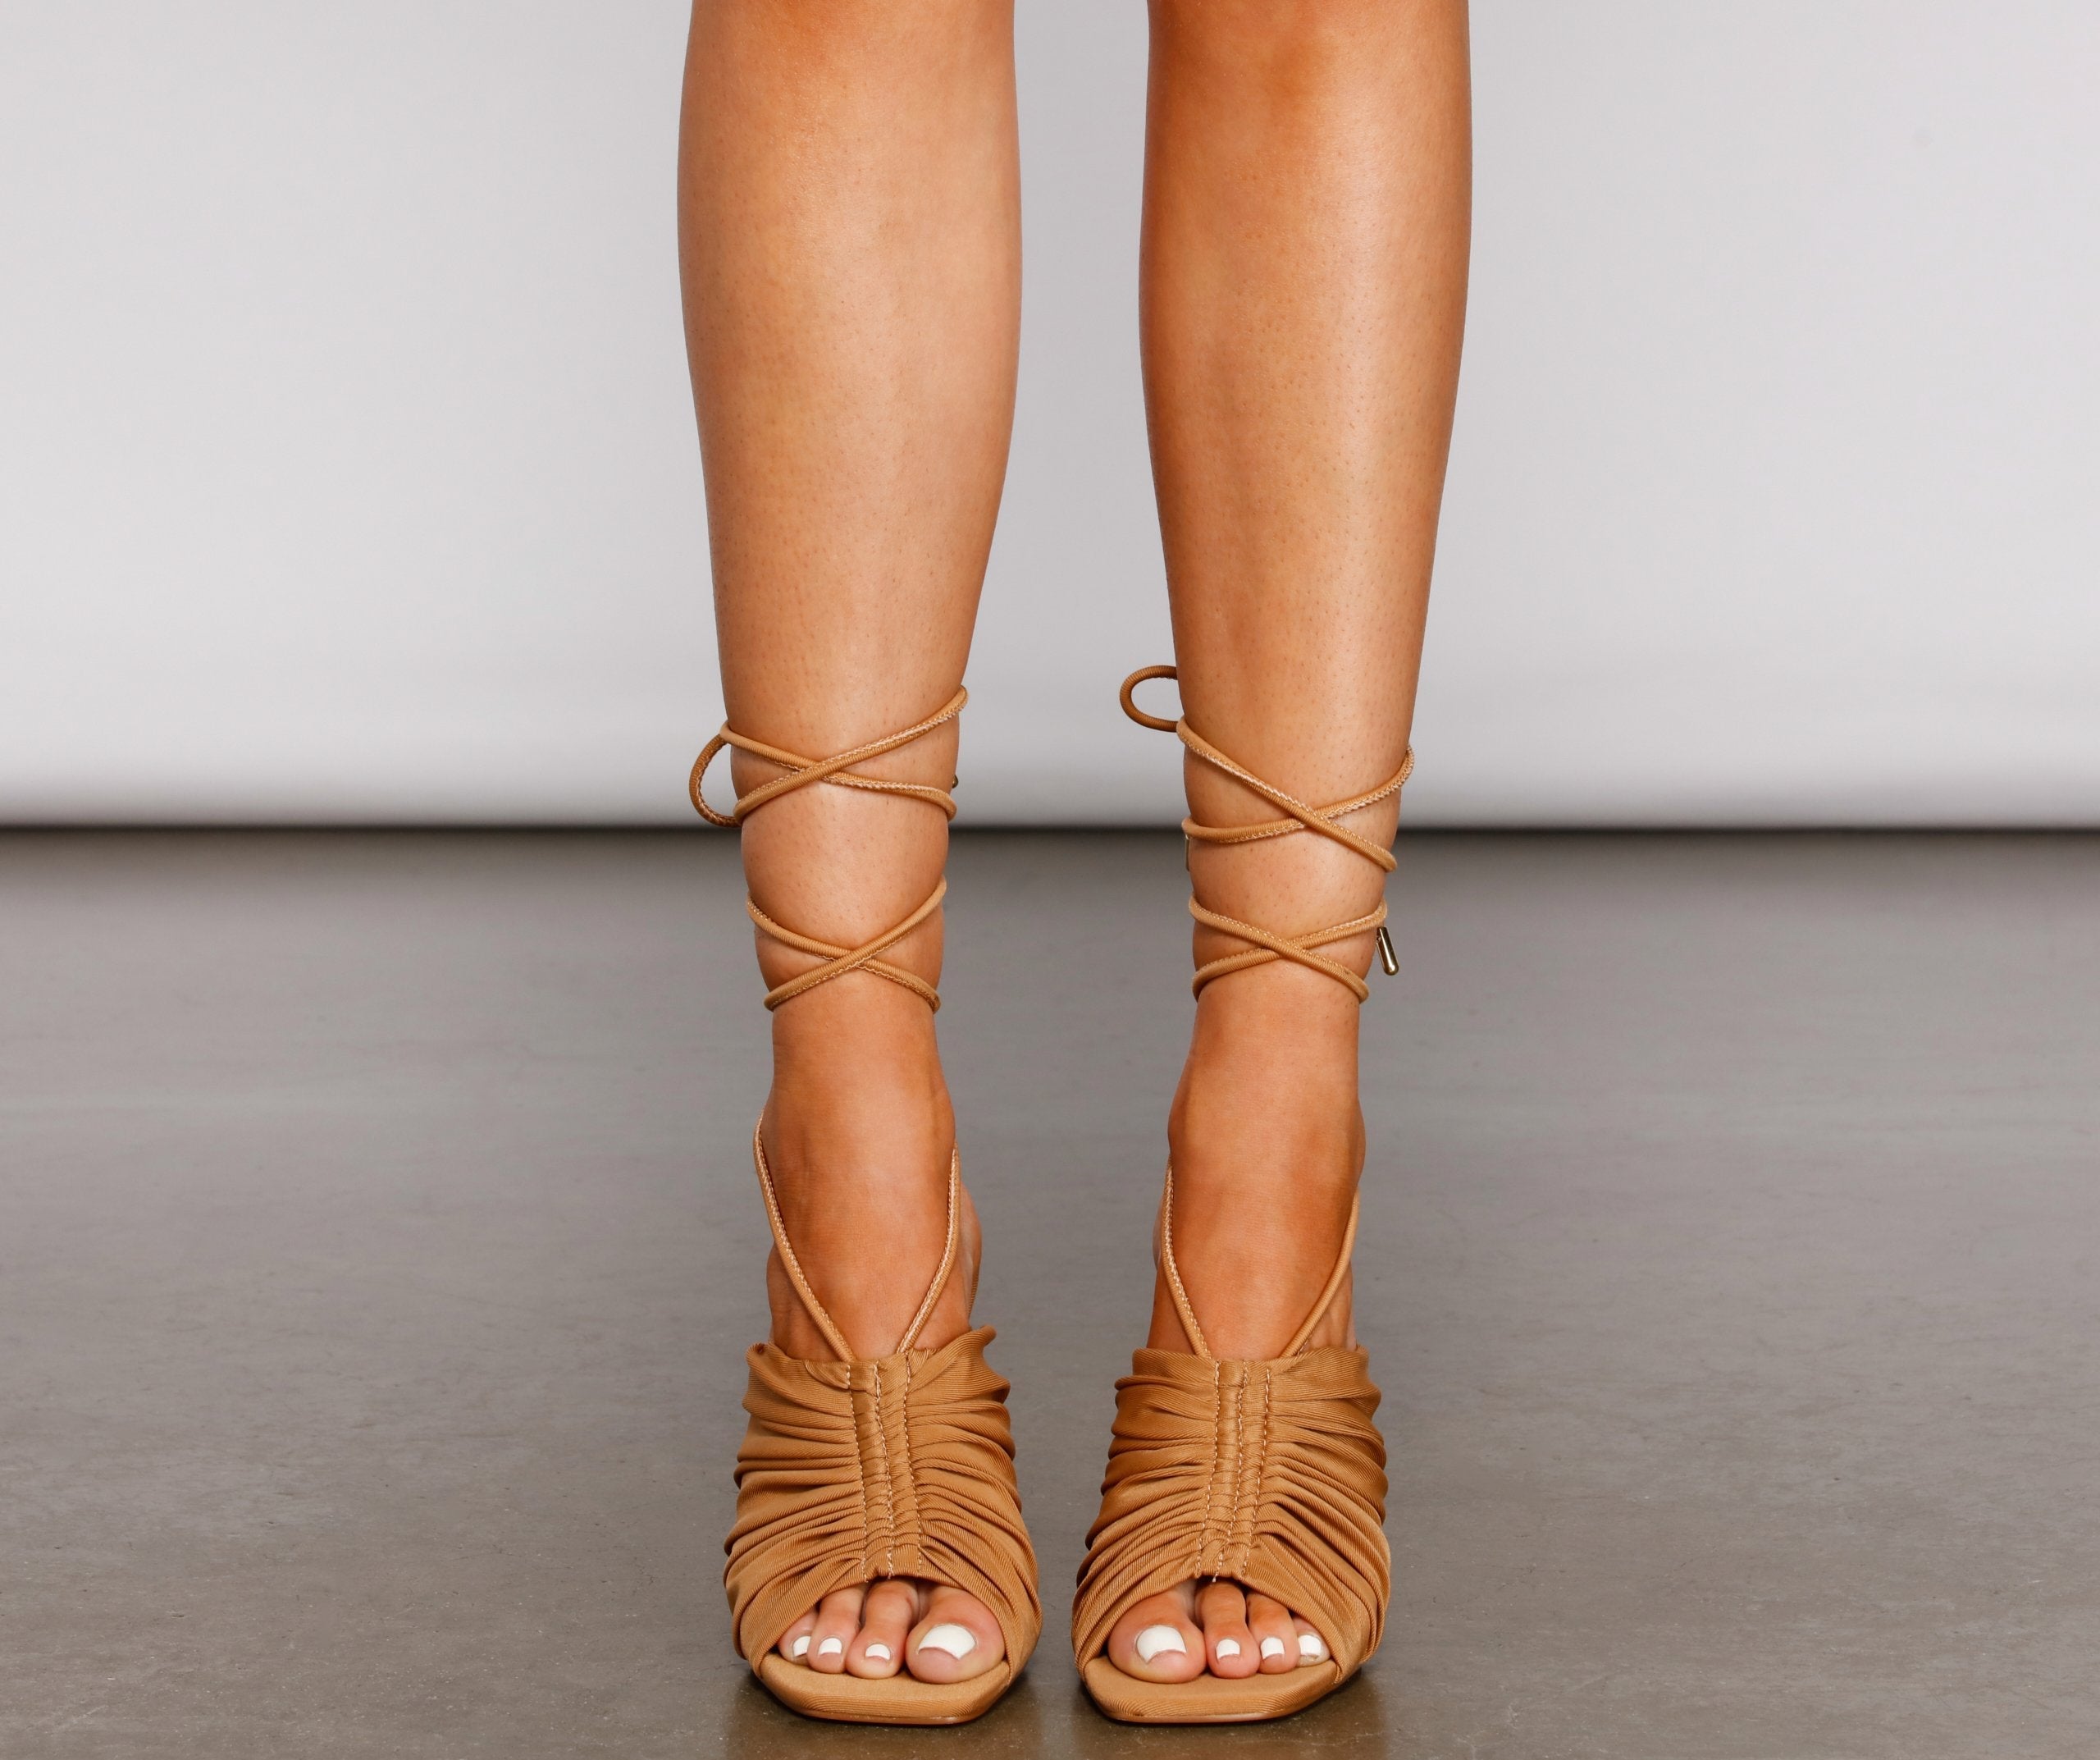 Trendsetting Queen Lace-Up Heels - Lady Occasions